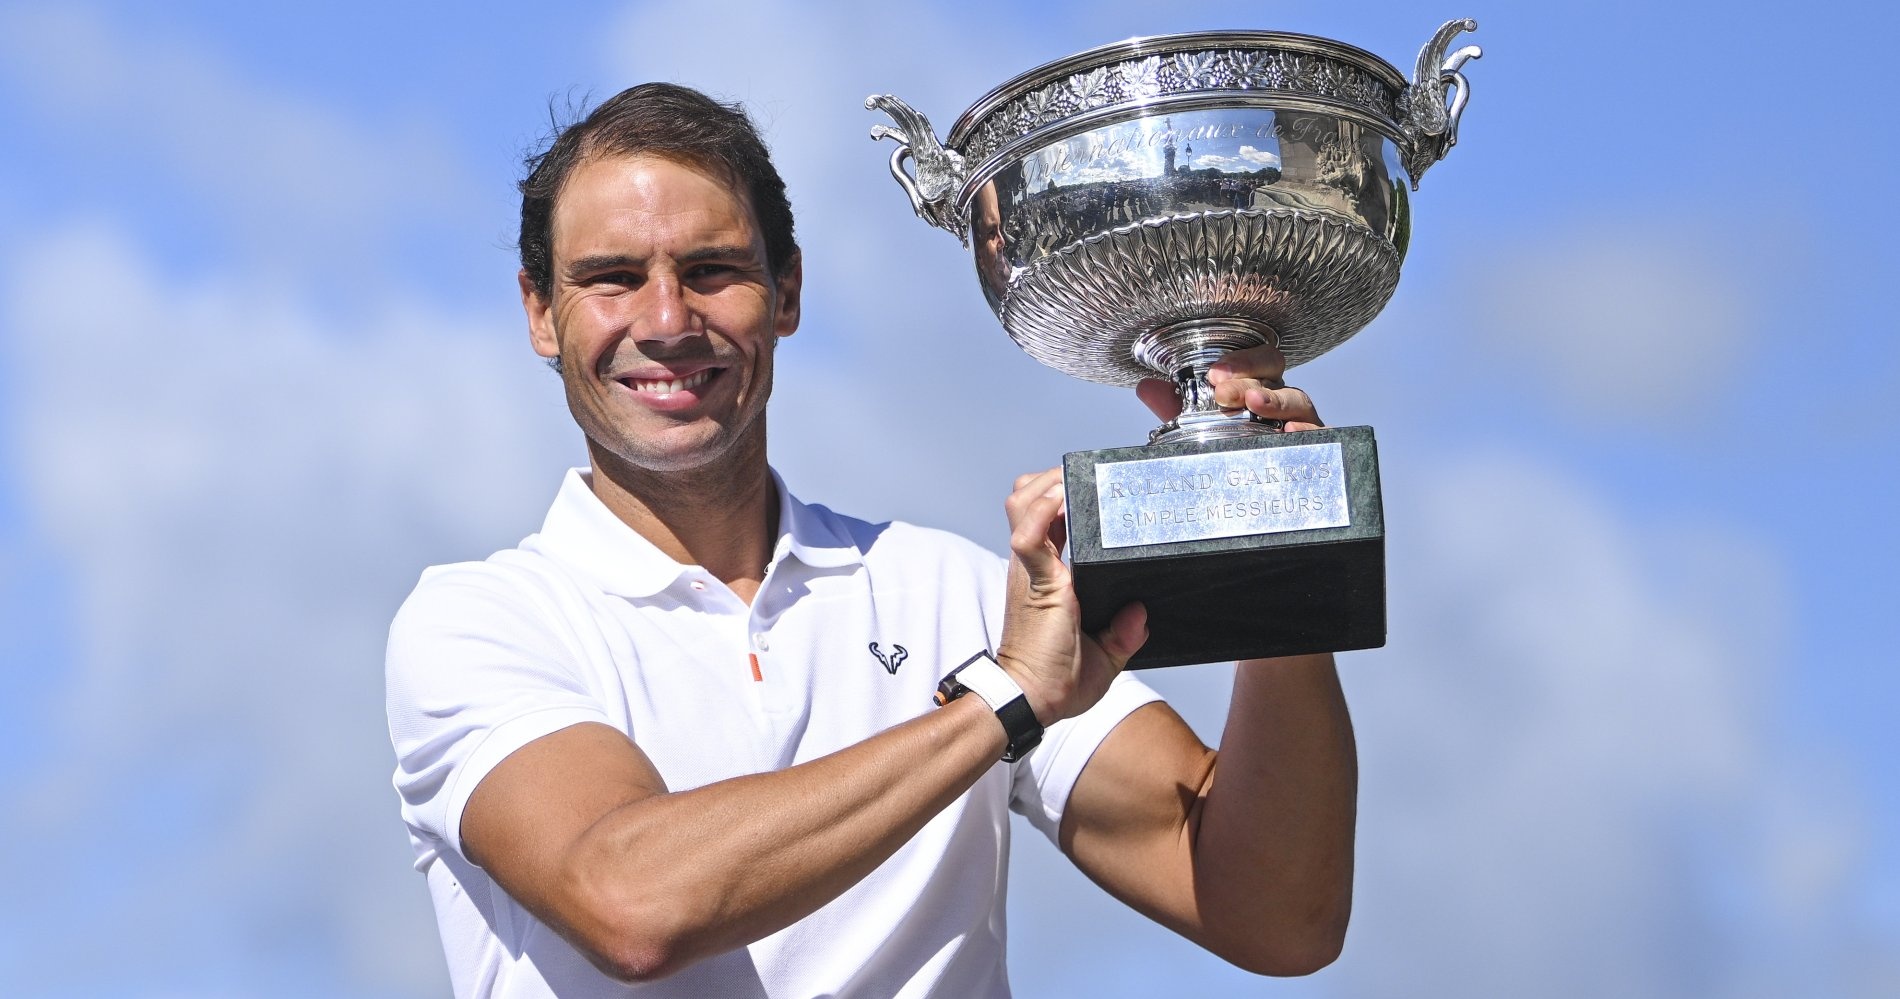 French Open 2022: GOAT Rafael Nadal defeats Casper Ruud to win historic  14th title, 22nd Grand Slam, see pictures